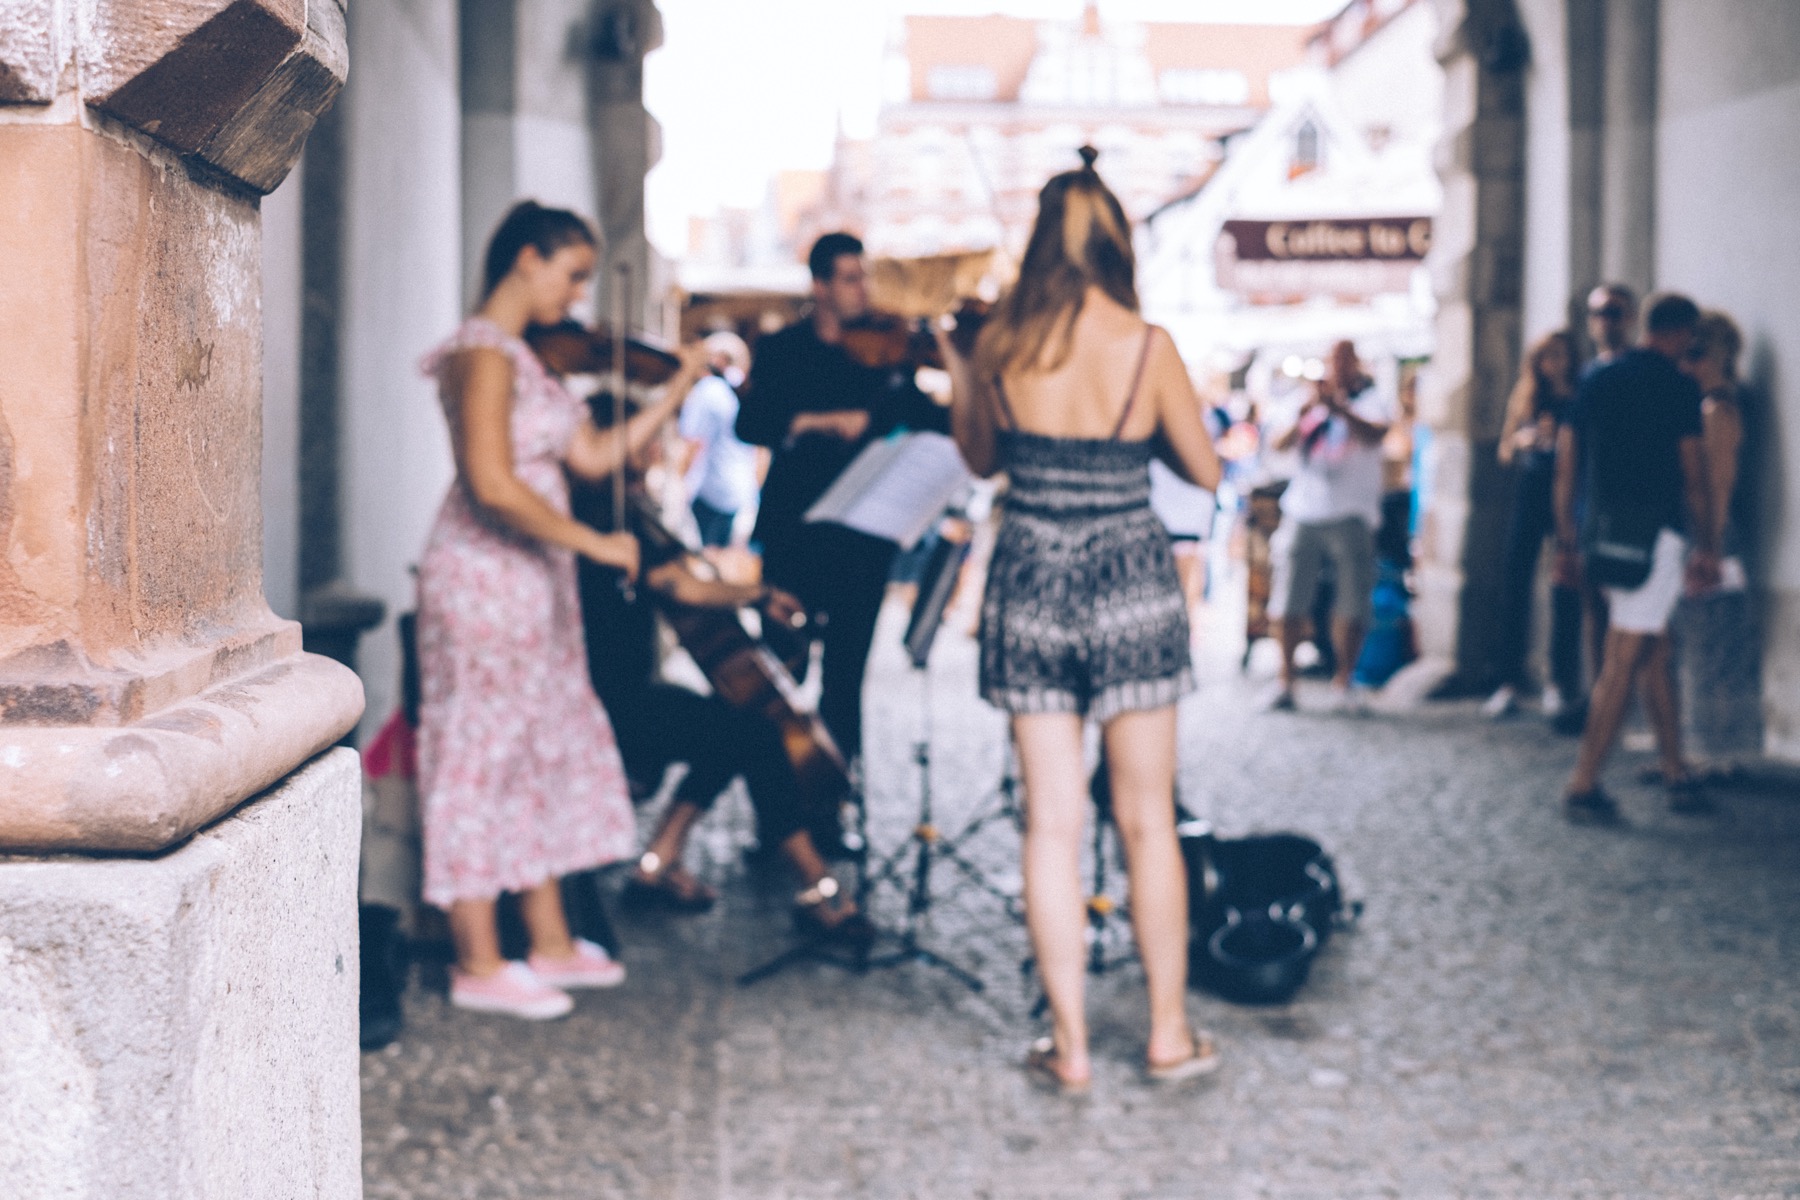 Group of young violinists busking